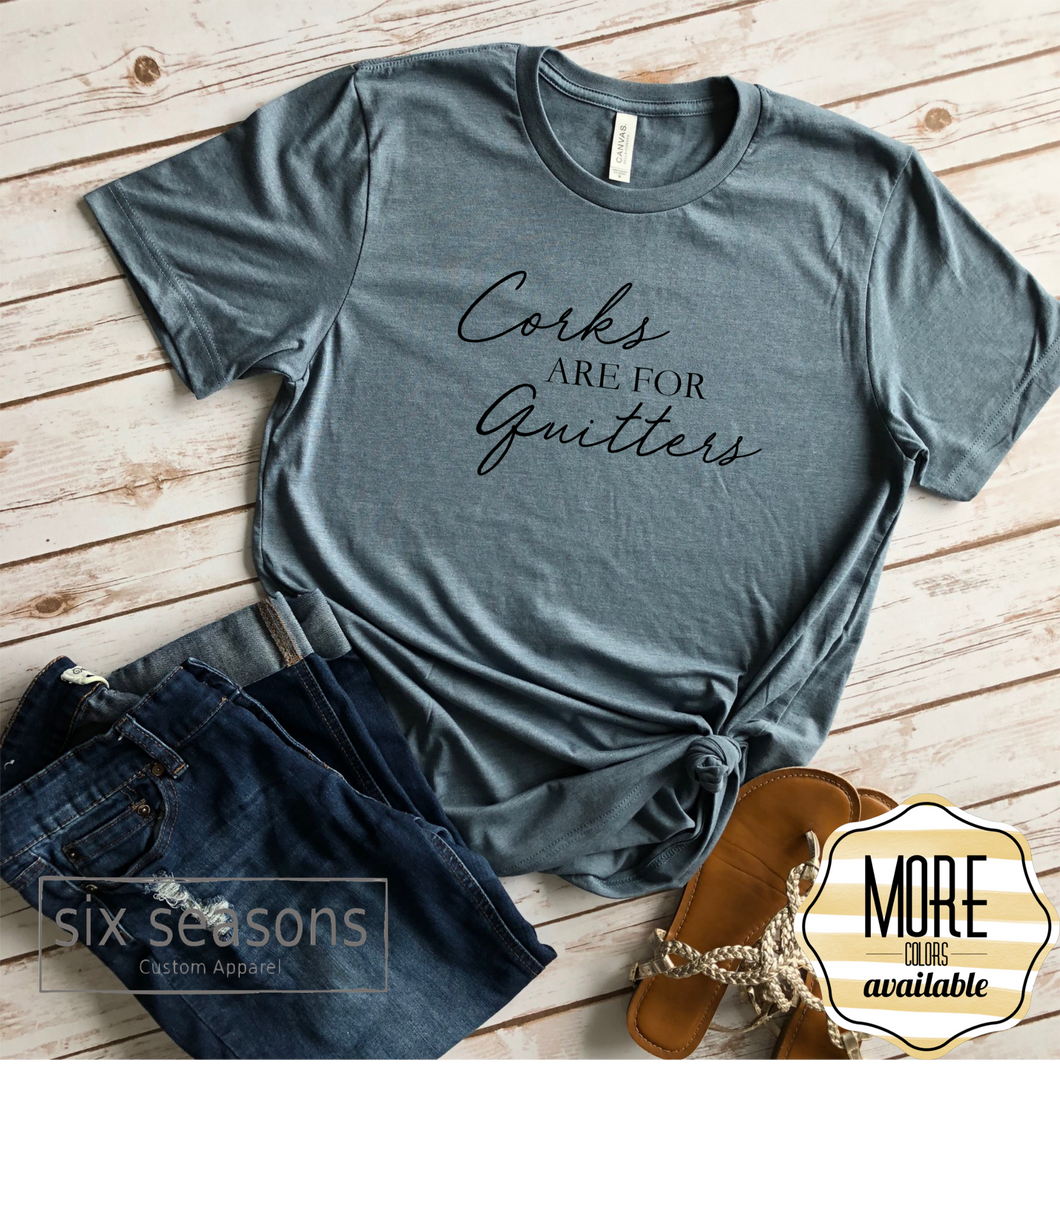 Corks Are For Quitters Tee